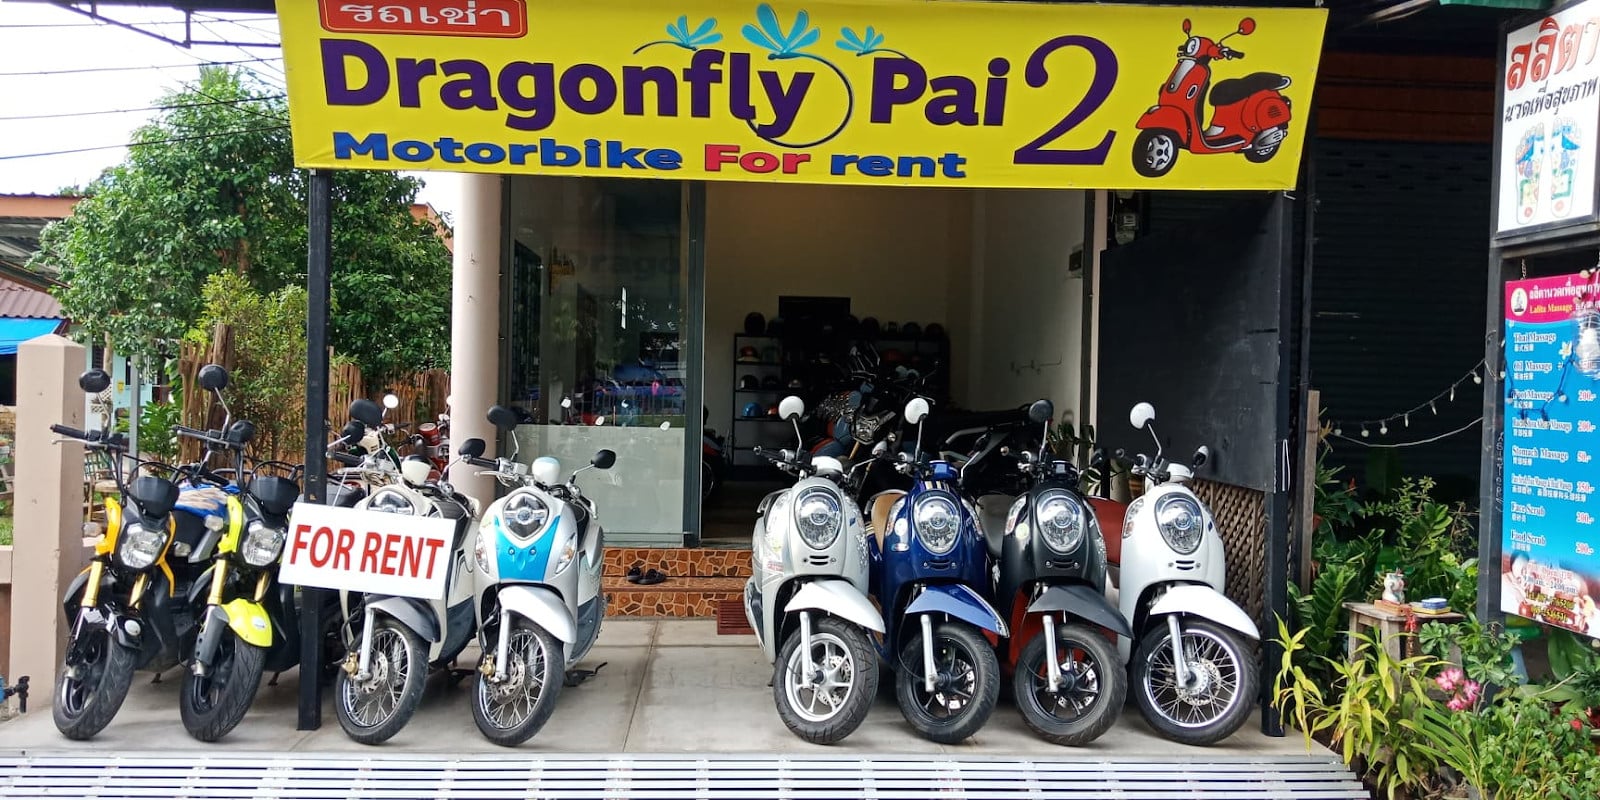 The Dragonfly Pai Scooter Rental